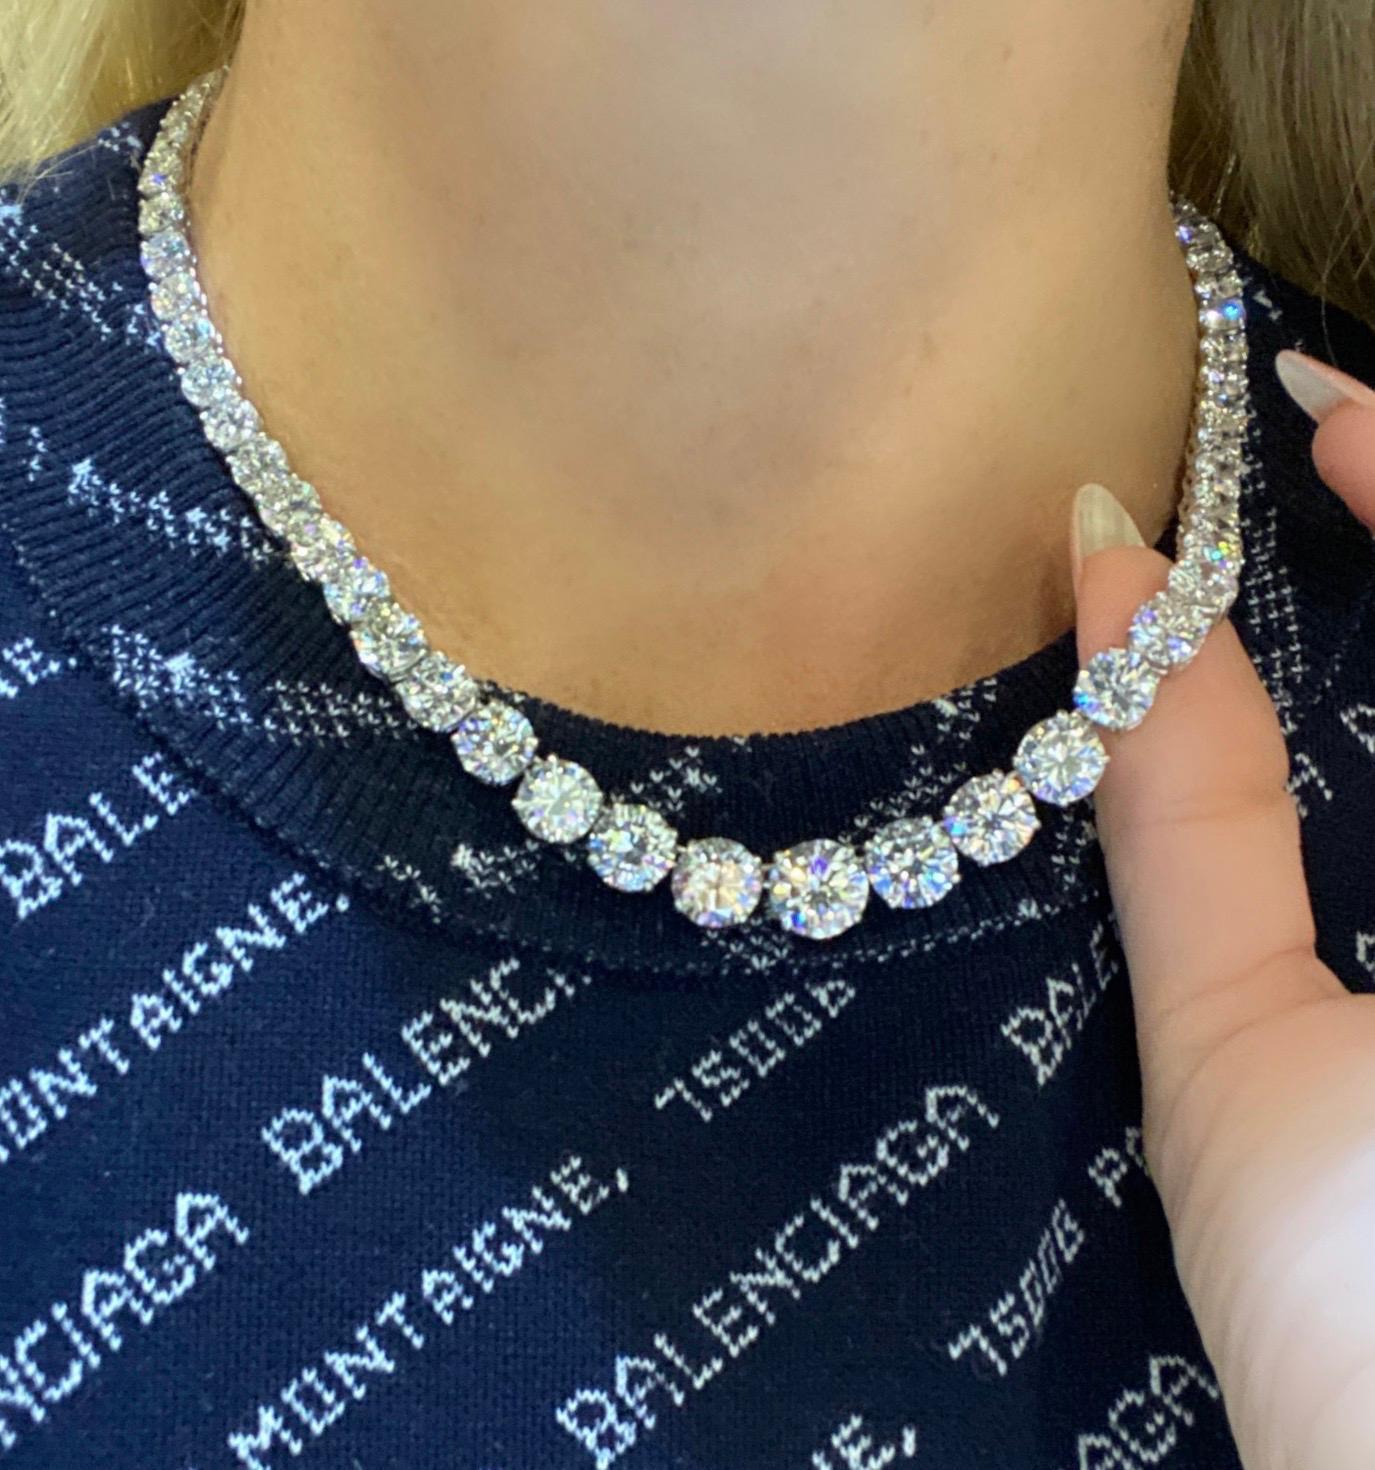 Incredible diamond graduated riviera diamond necklace
crafted in hand made platnium, showcasing 68 extraordinary ideal round brilliant cut diamonds, each stone individually graded by the GIA.
weighing 54.09 total carat weight, diamonds range DEFG